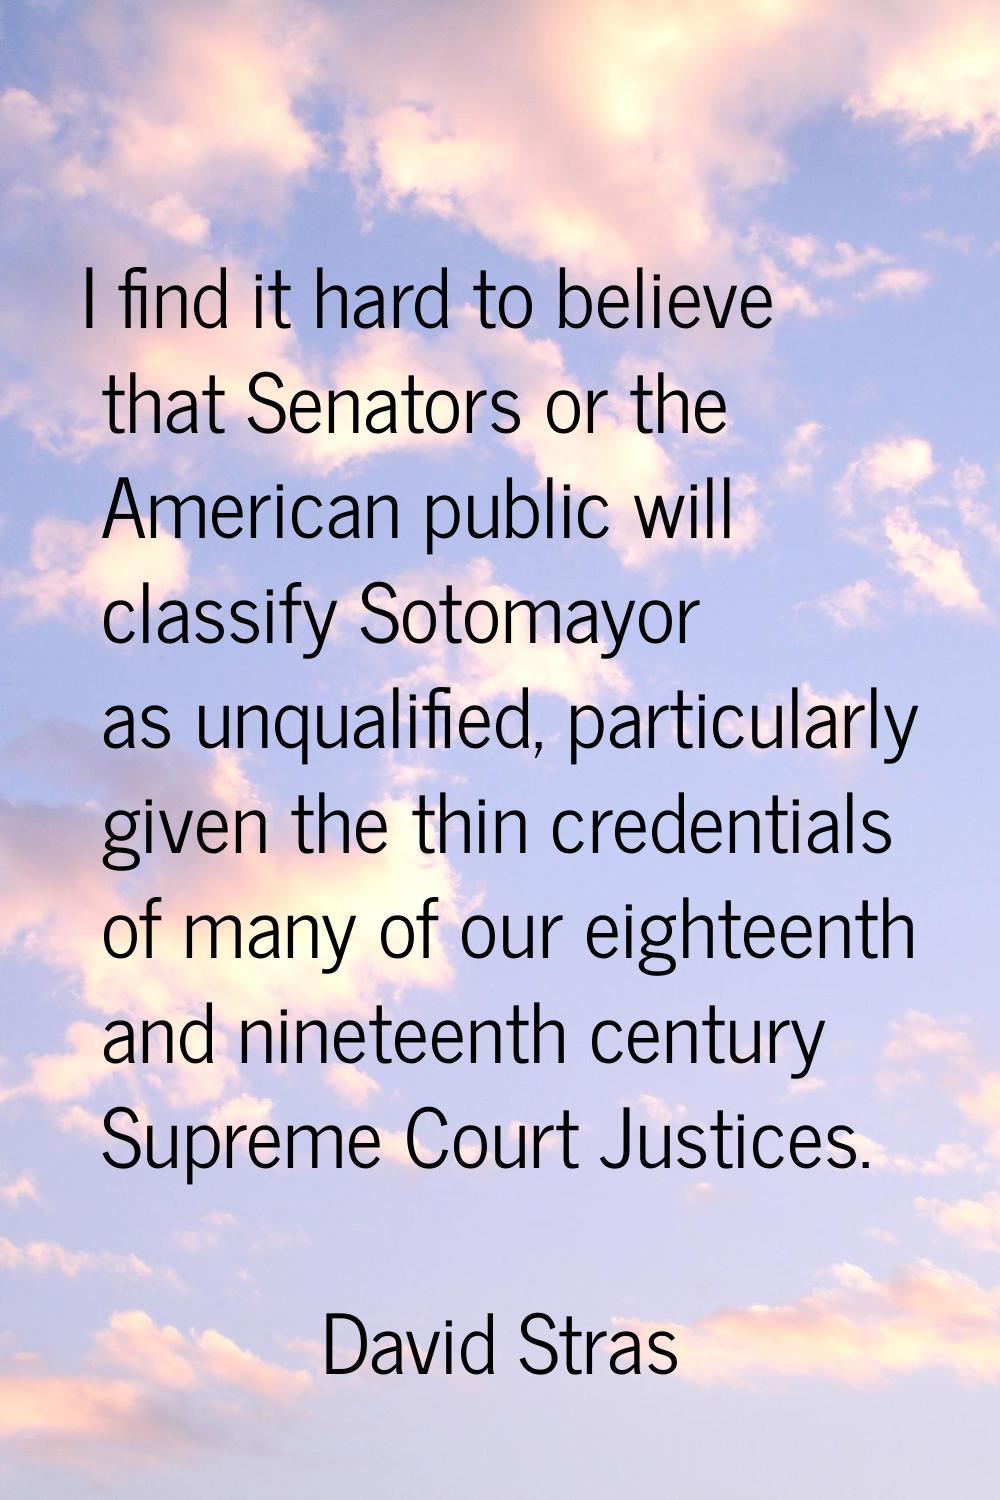 I find it hard to believe that Senators or the American public will classify Sotomayor as unqualifi